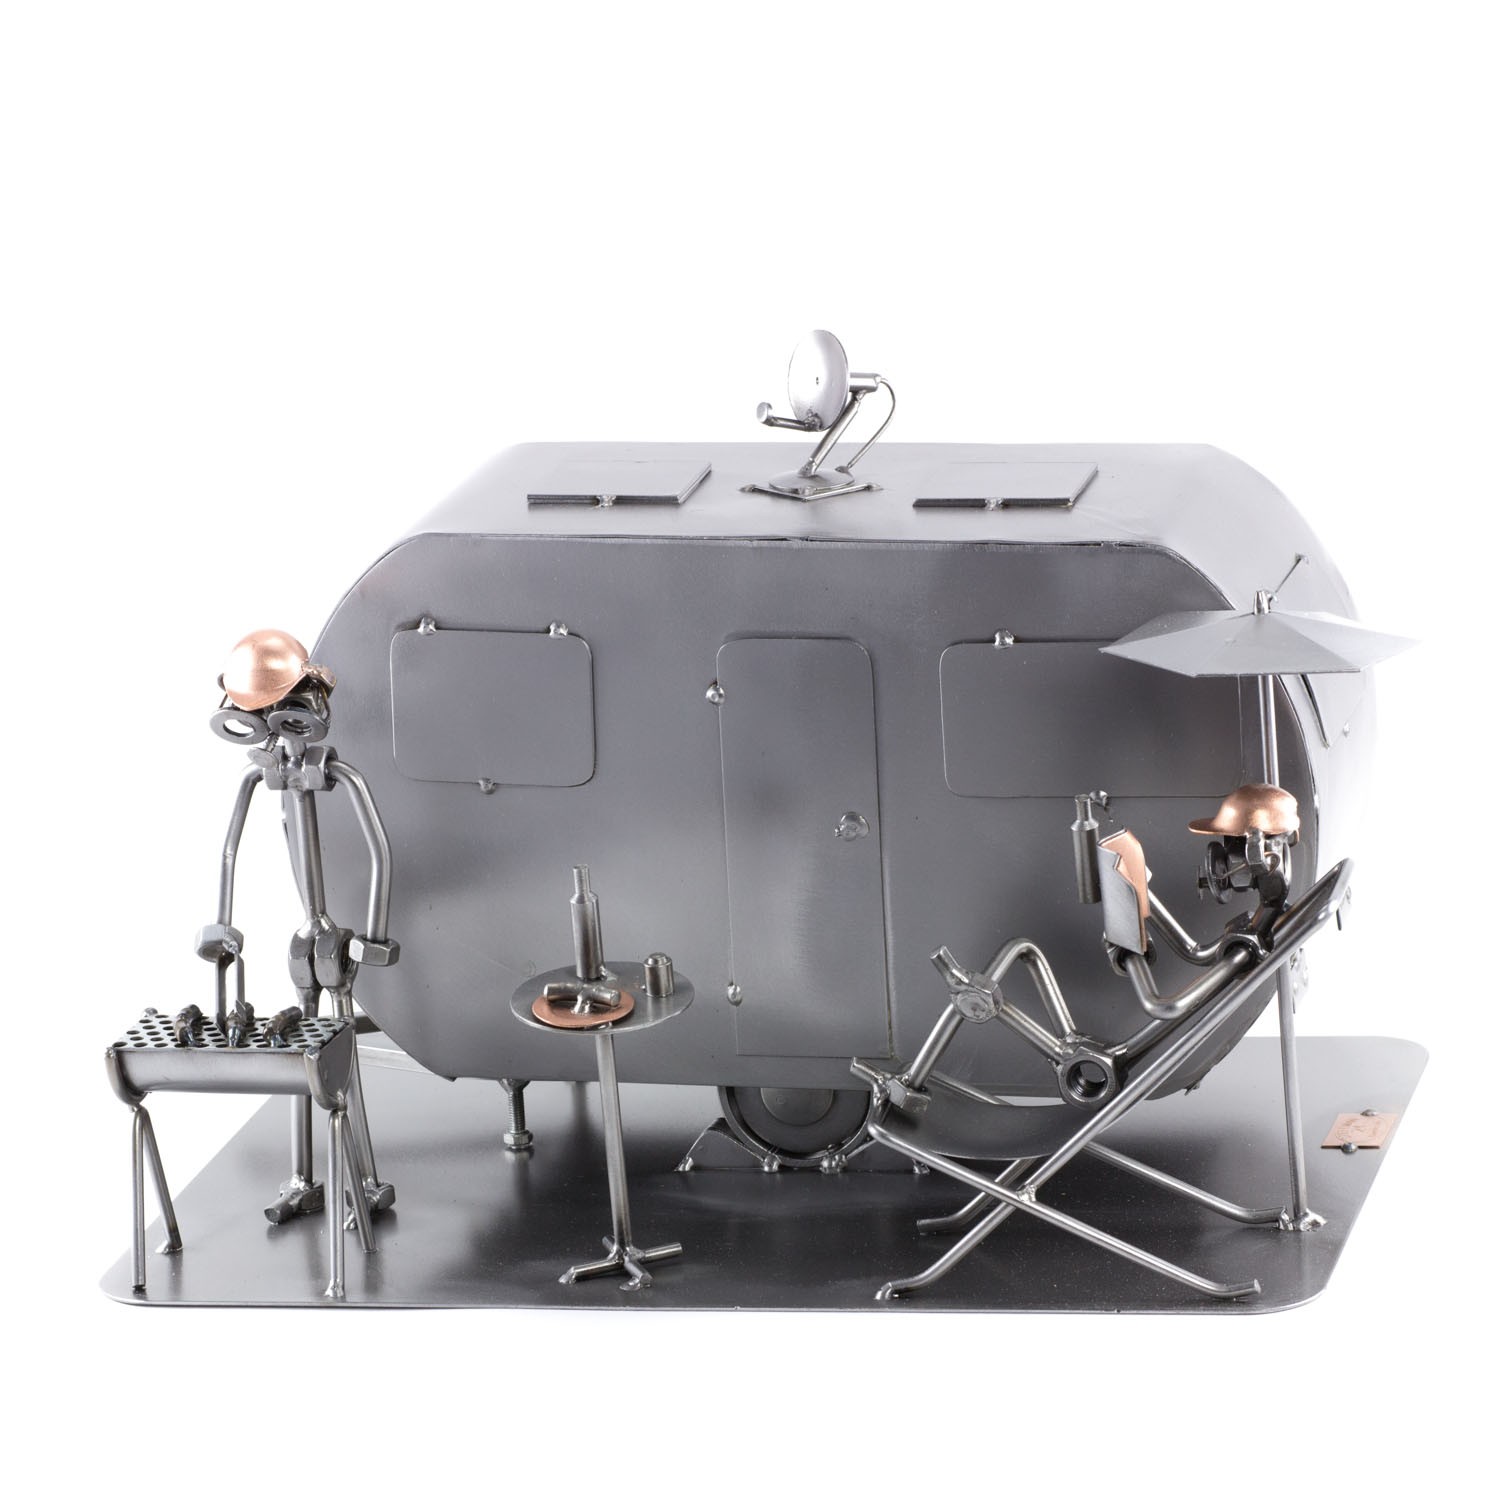 Two Steelman bbq-ing and relaxing beside an RV/Travel Trailer Camping metal art figurine